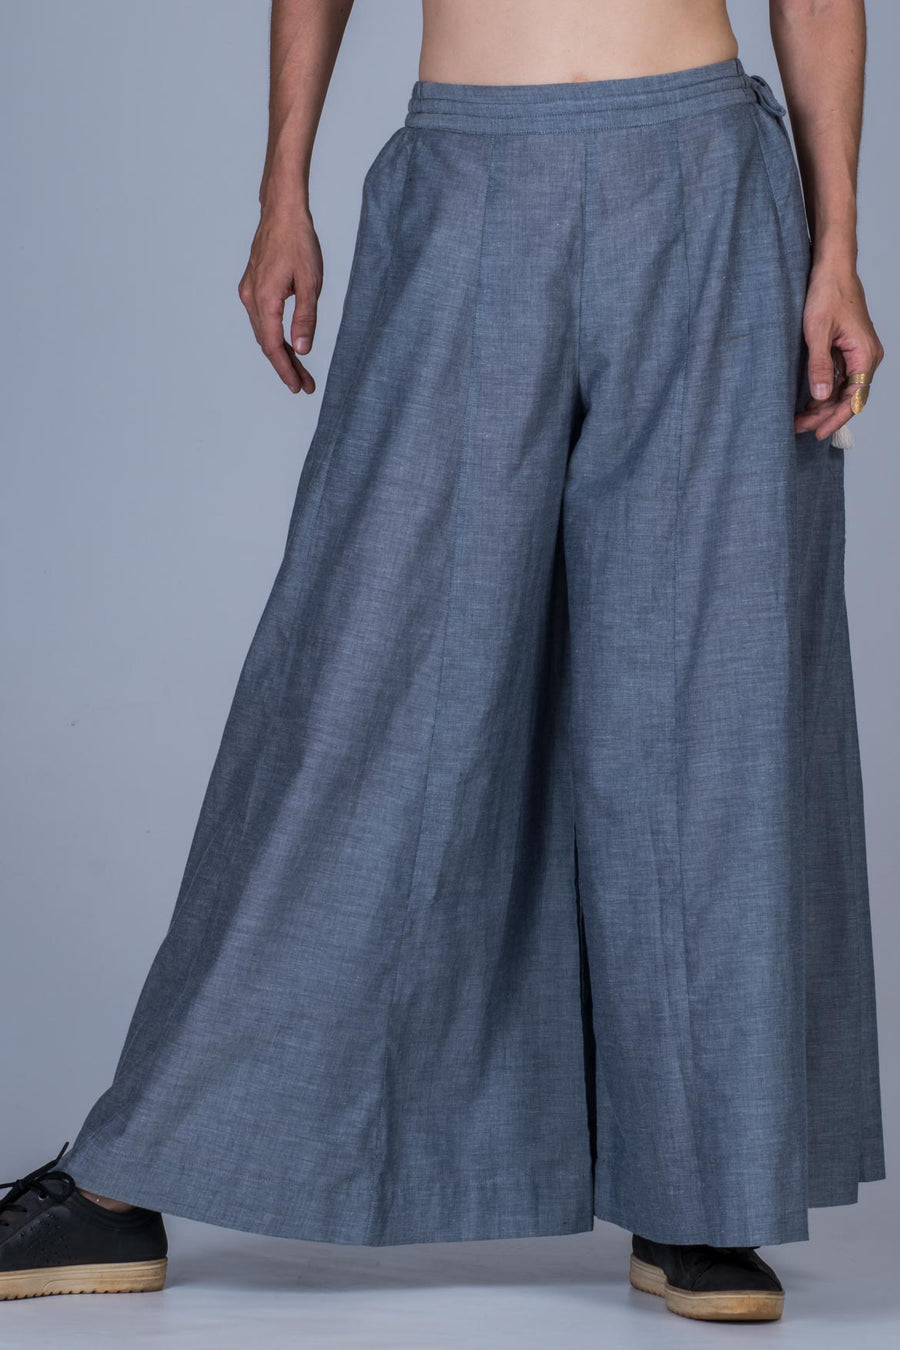 Casual Printed Dark Blue Denim Palazzo Pants For Girls And Women in Kullu  at best price by A V Collection - Justdial